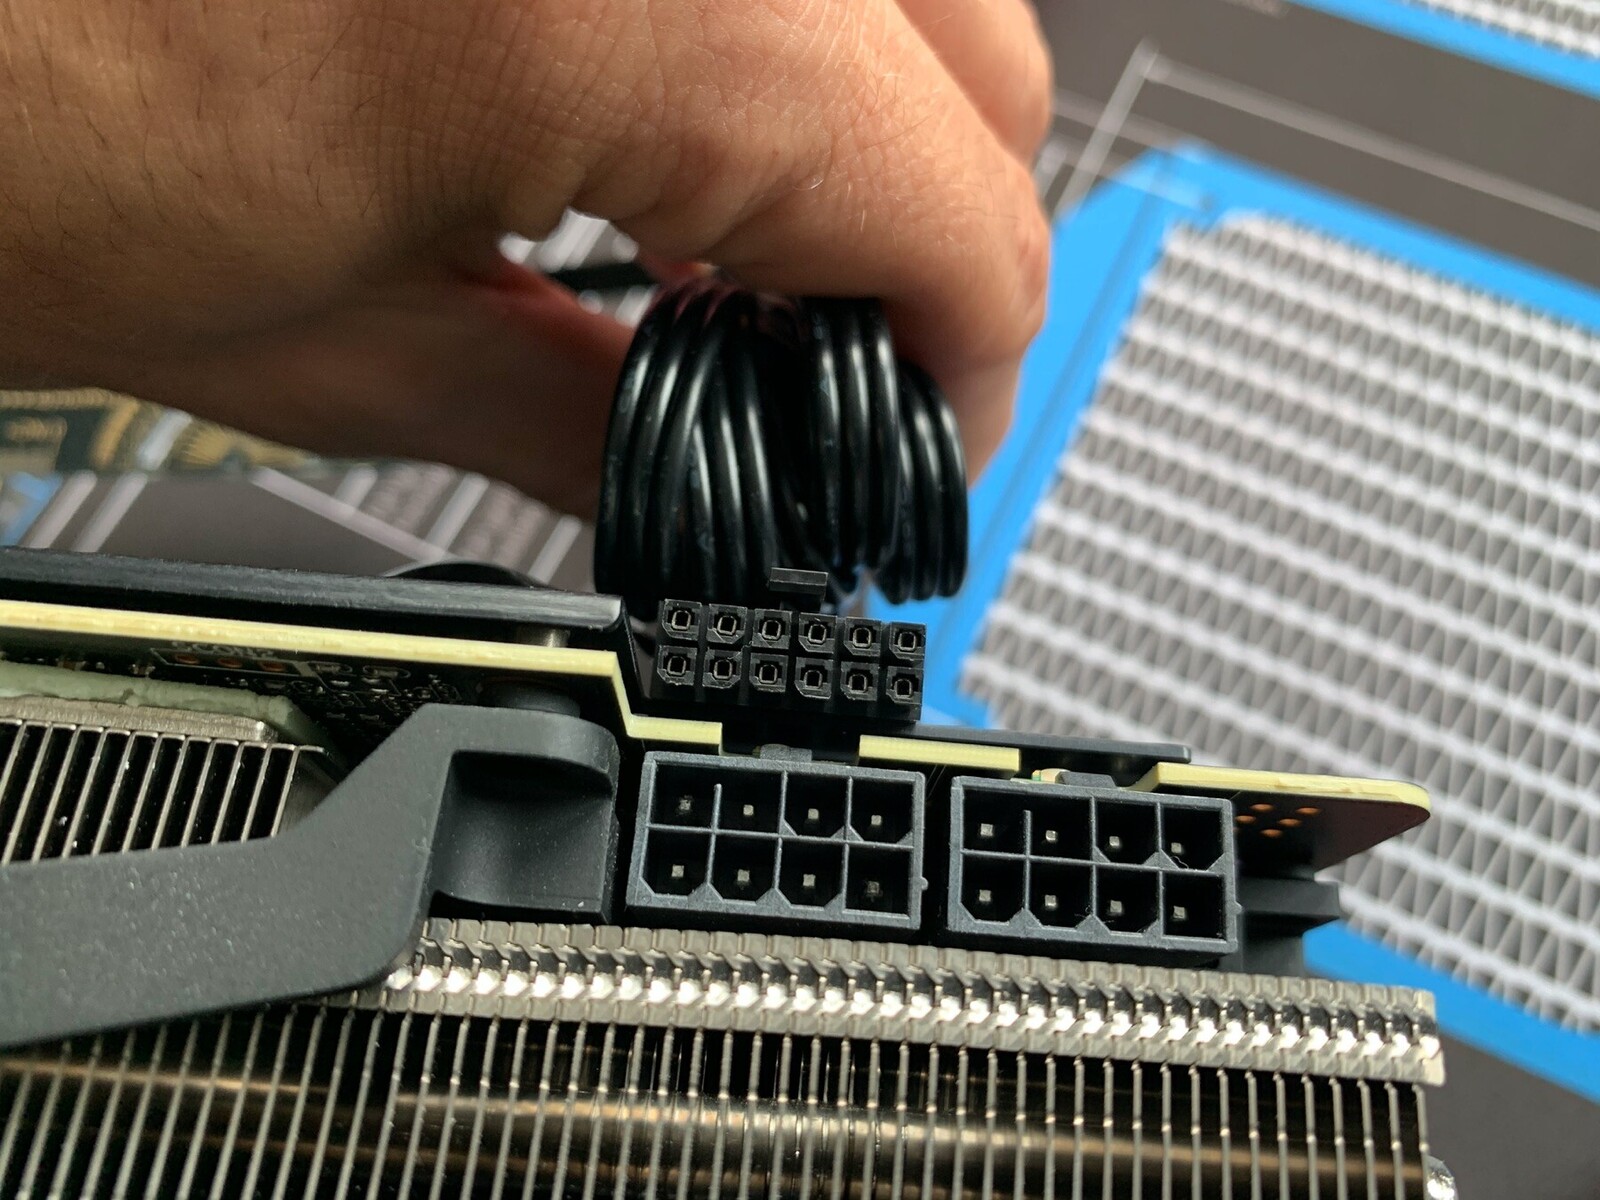 NVIDIA's new power connector for 3000 cards is in the wild - NotebookCheck.net News